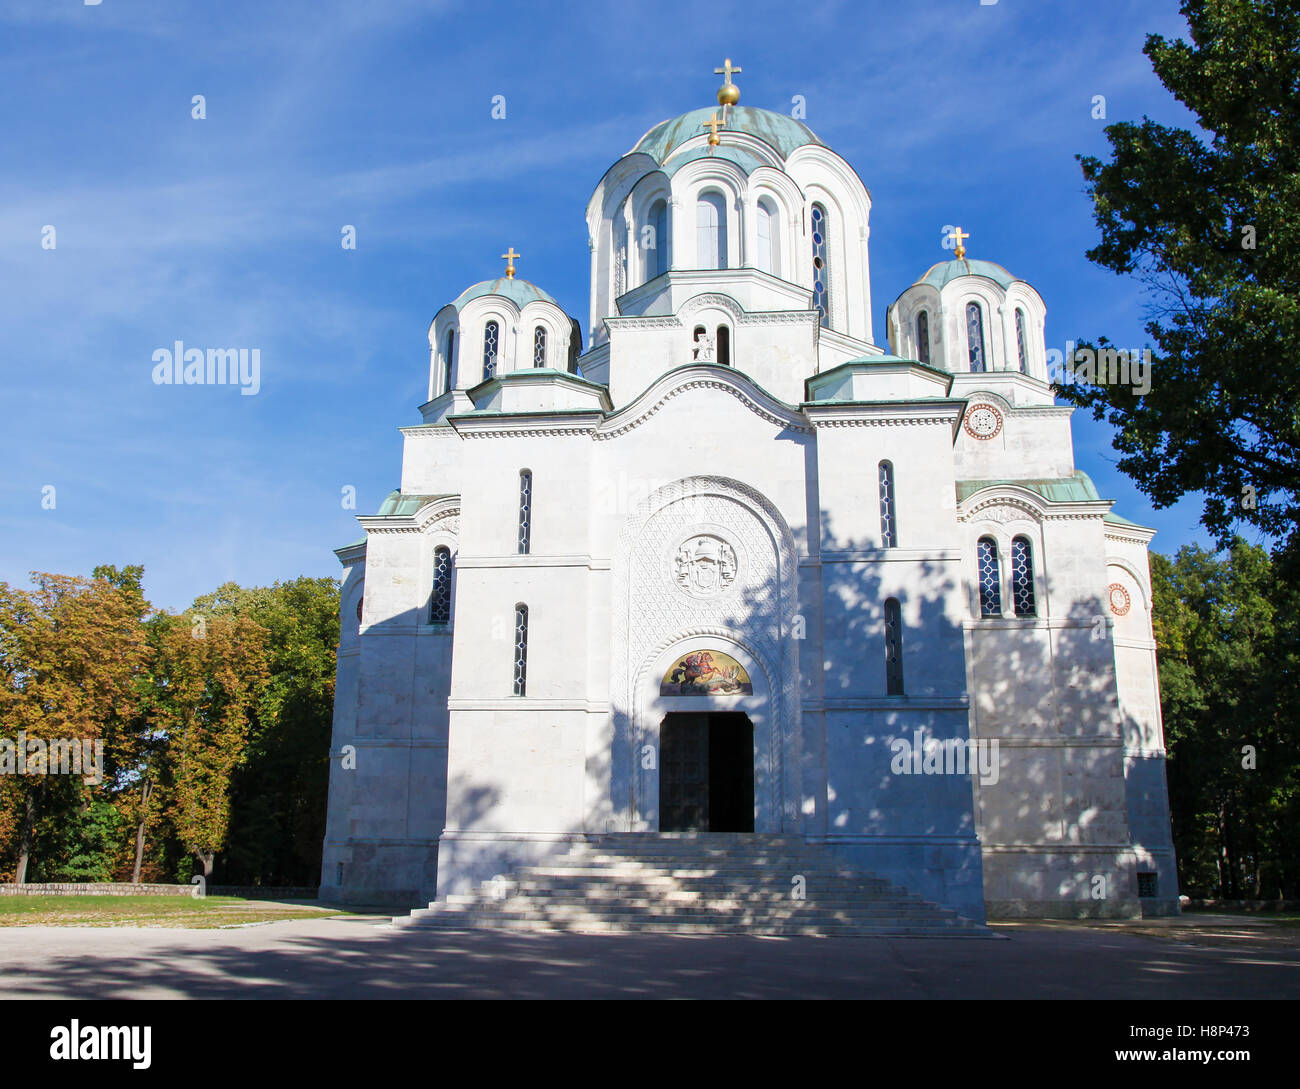 The Church of Saint Sava is a Serbian Orthodox church located on the Vracar plateau in Belgrade. It is one of the largest Orthod Stock Photo